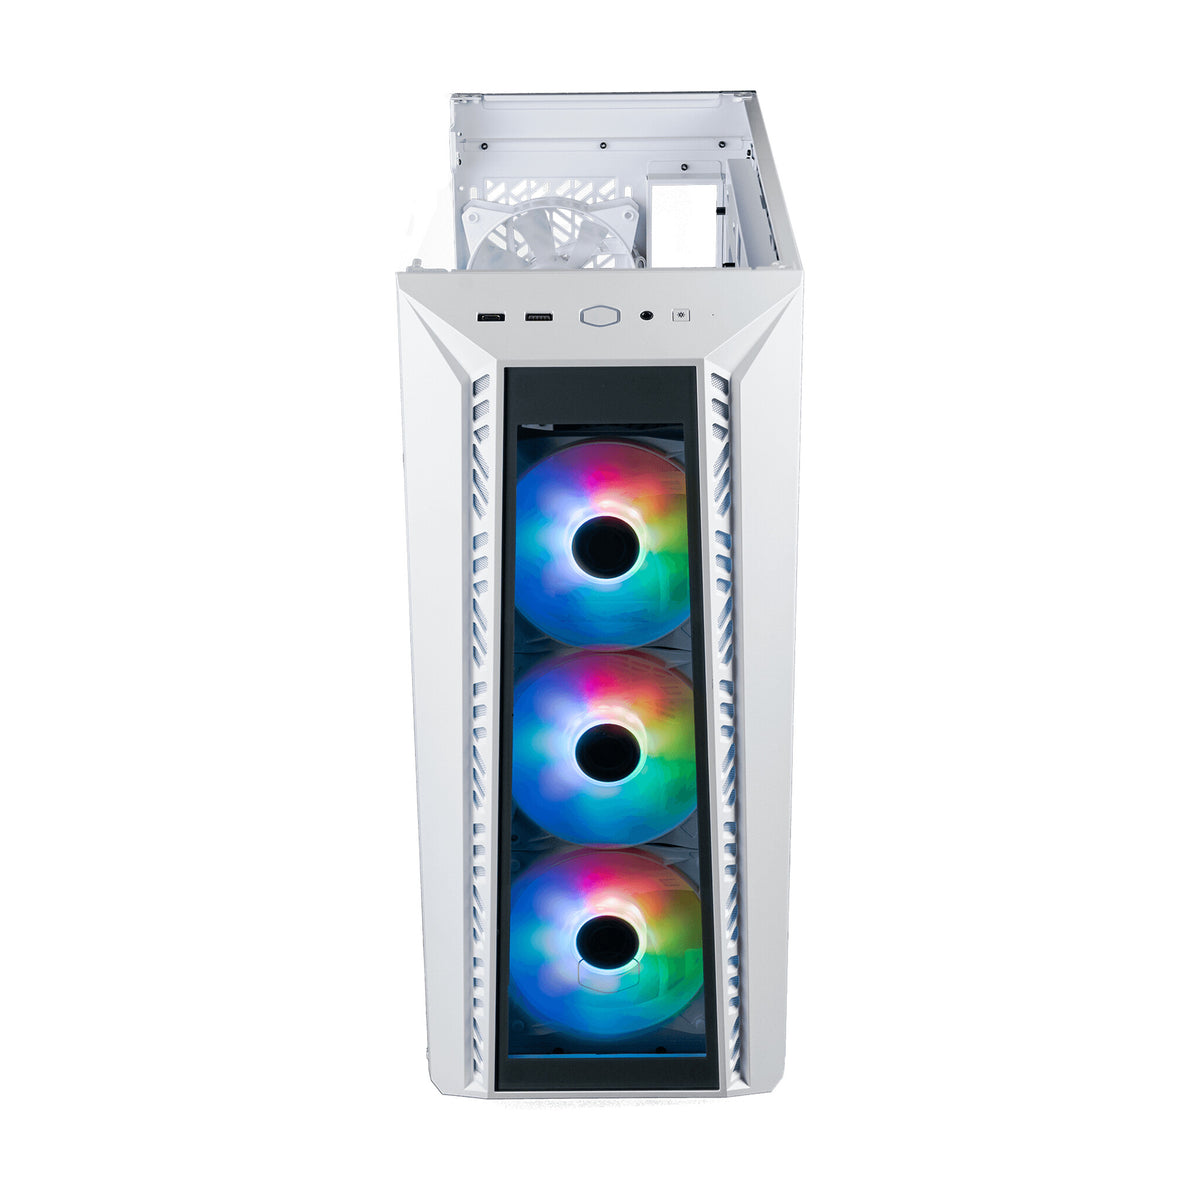 Cooler Master MasterBox 520 - ATX Mid Tower Case in White